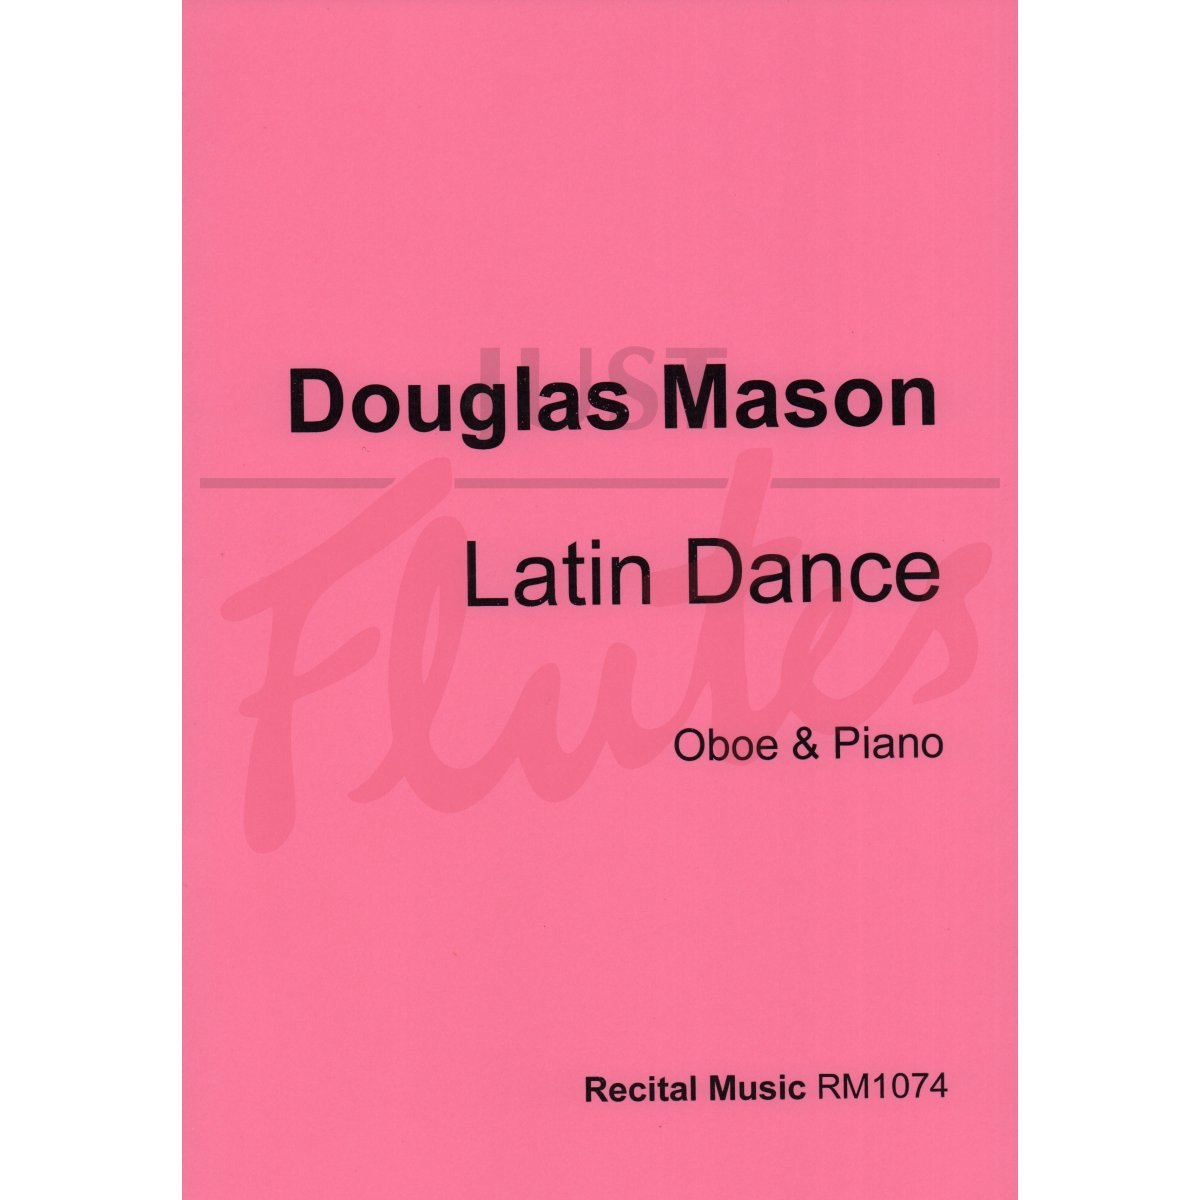 Latin Dance for Oboe and Piano